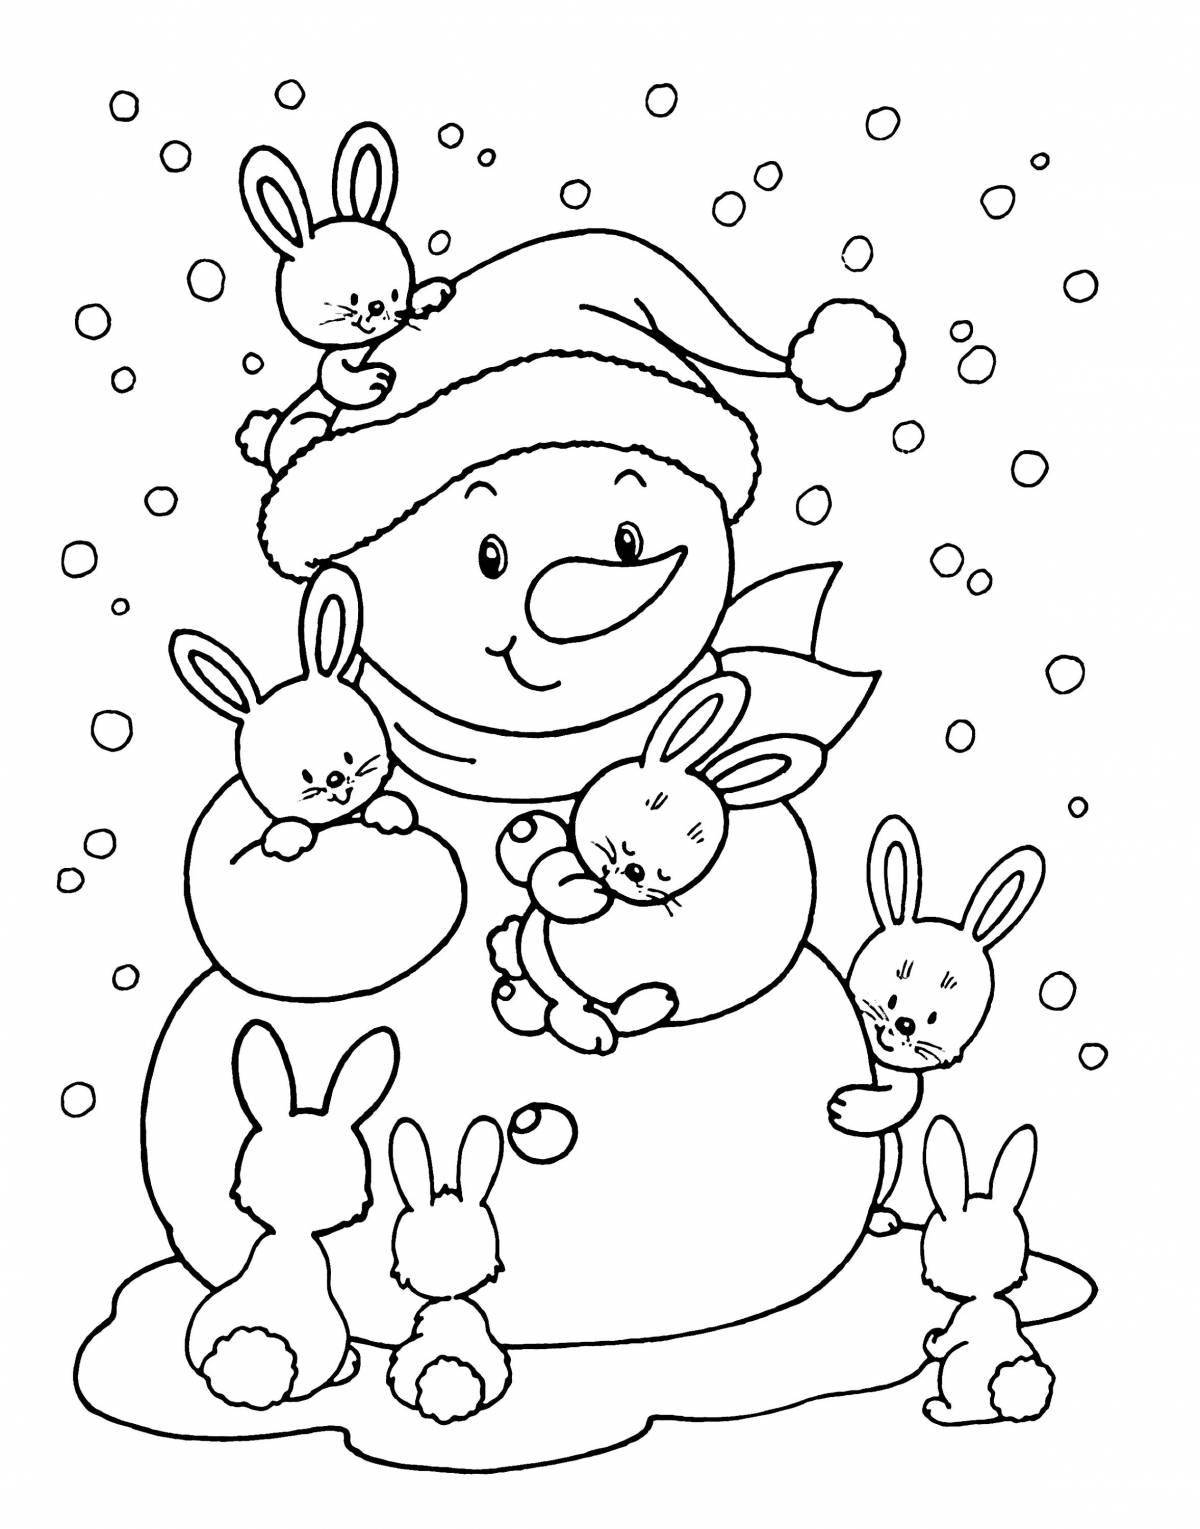 Gorgeous Christmas snowman coloring page